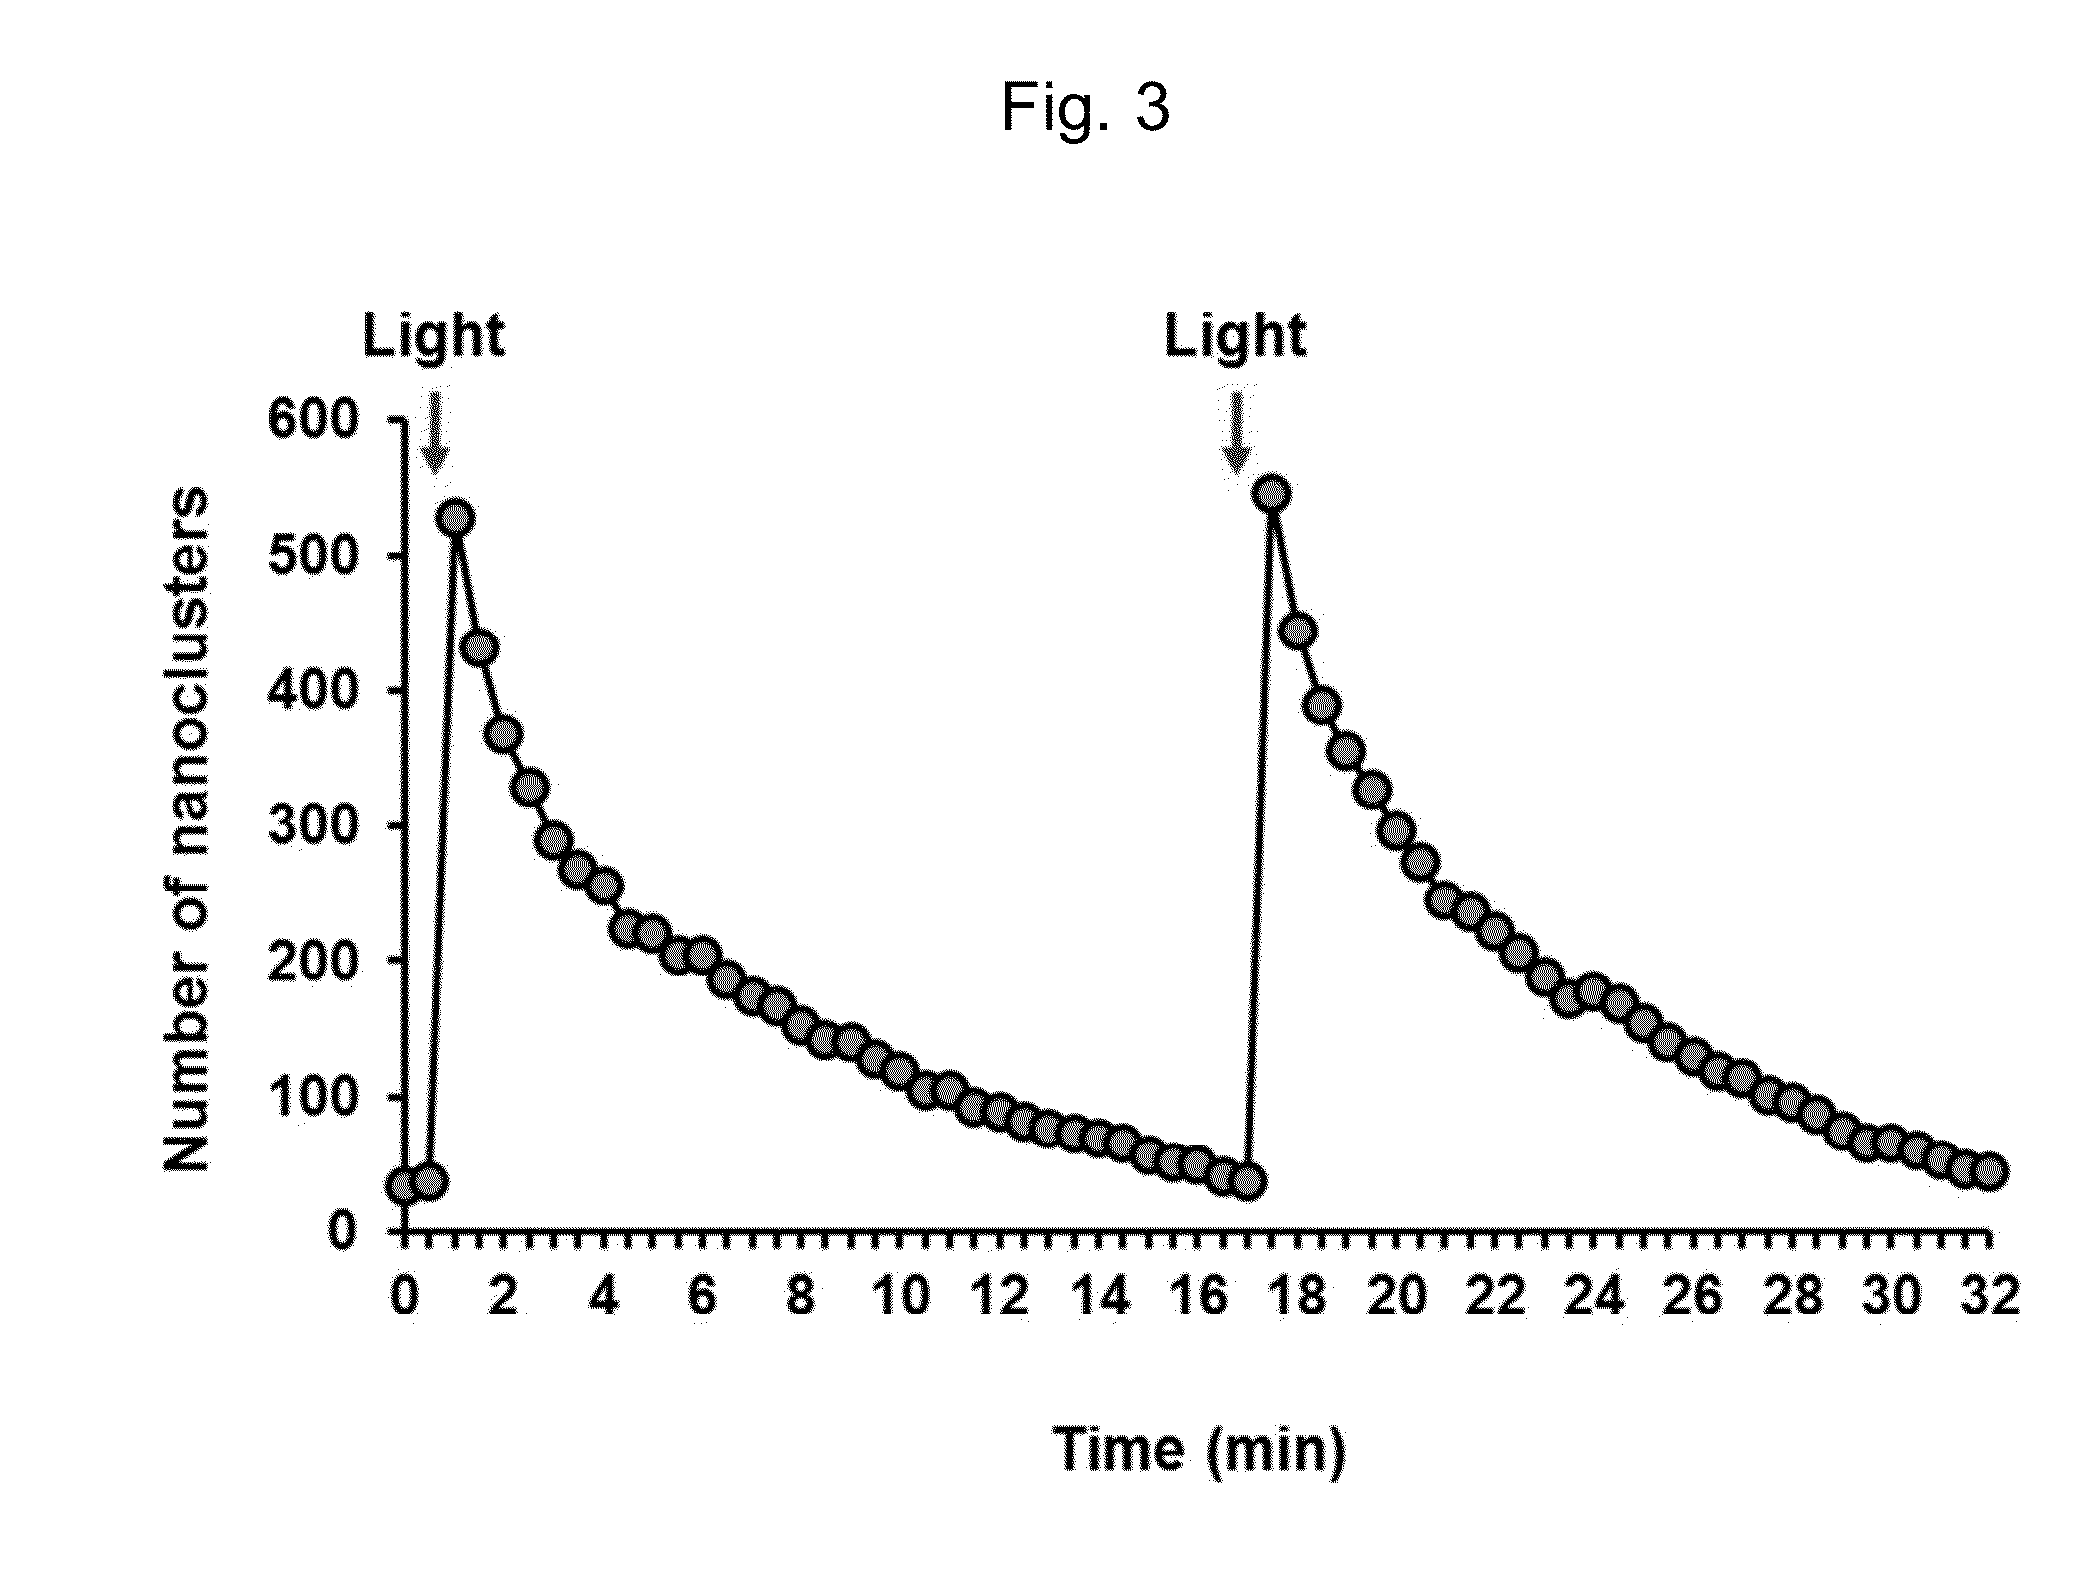 Method for forming a reversible protein nanocluster using light in a cell